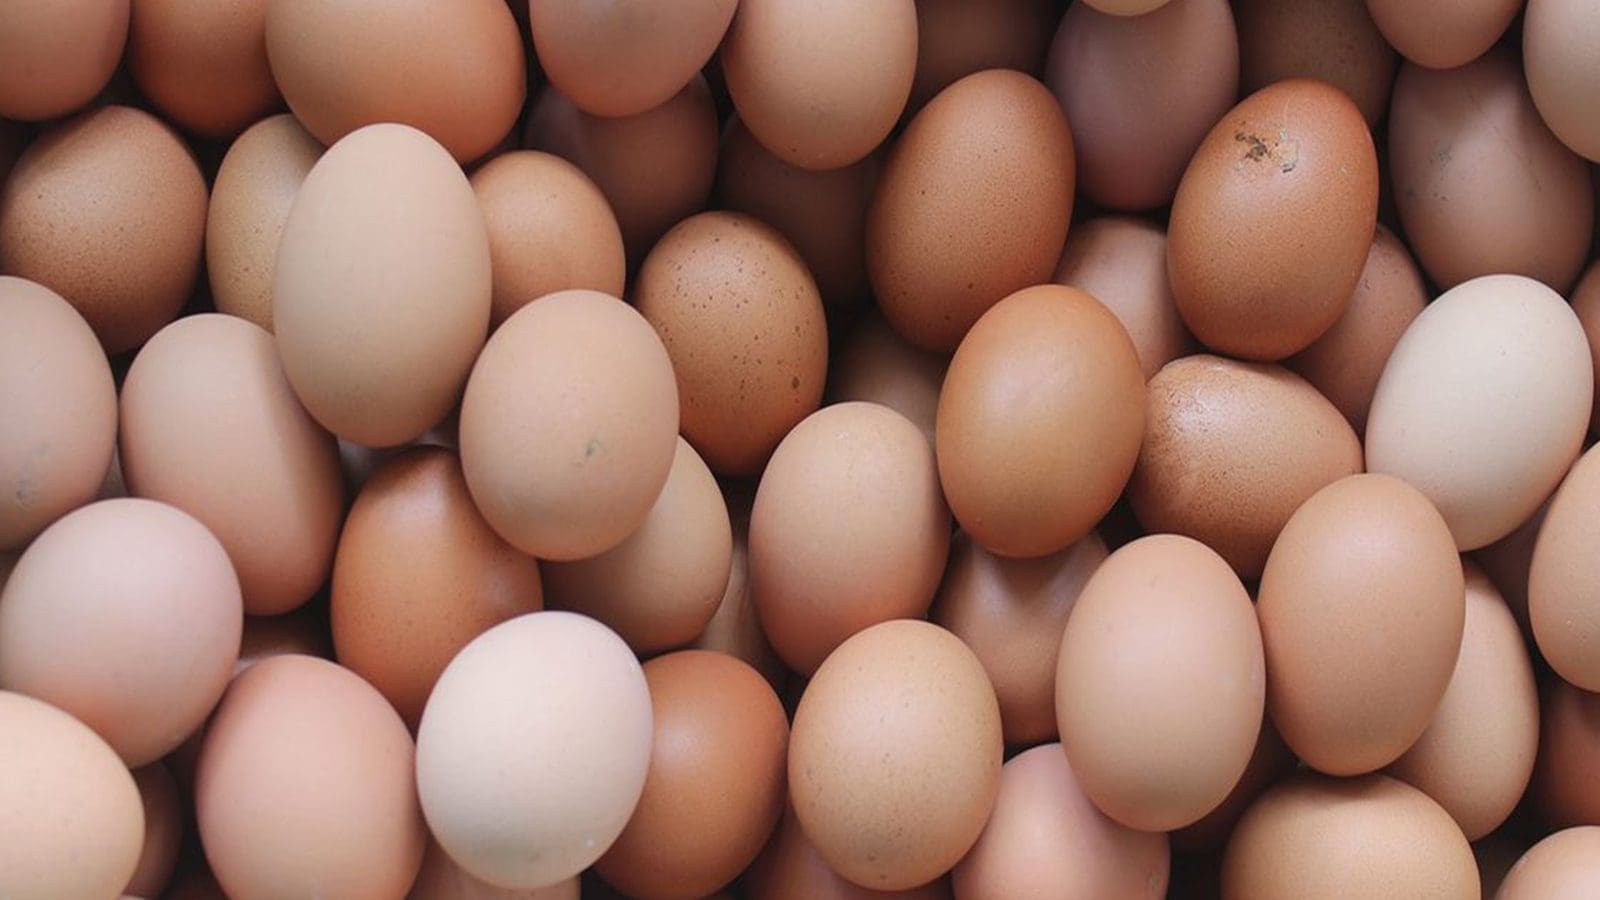 UK foodborne outbreak traced to imported eggs from Poland, researchers uncover Salmonella enteritidis link